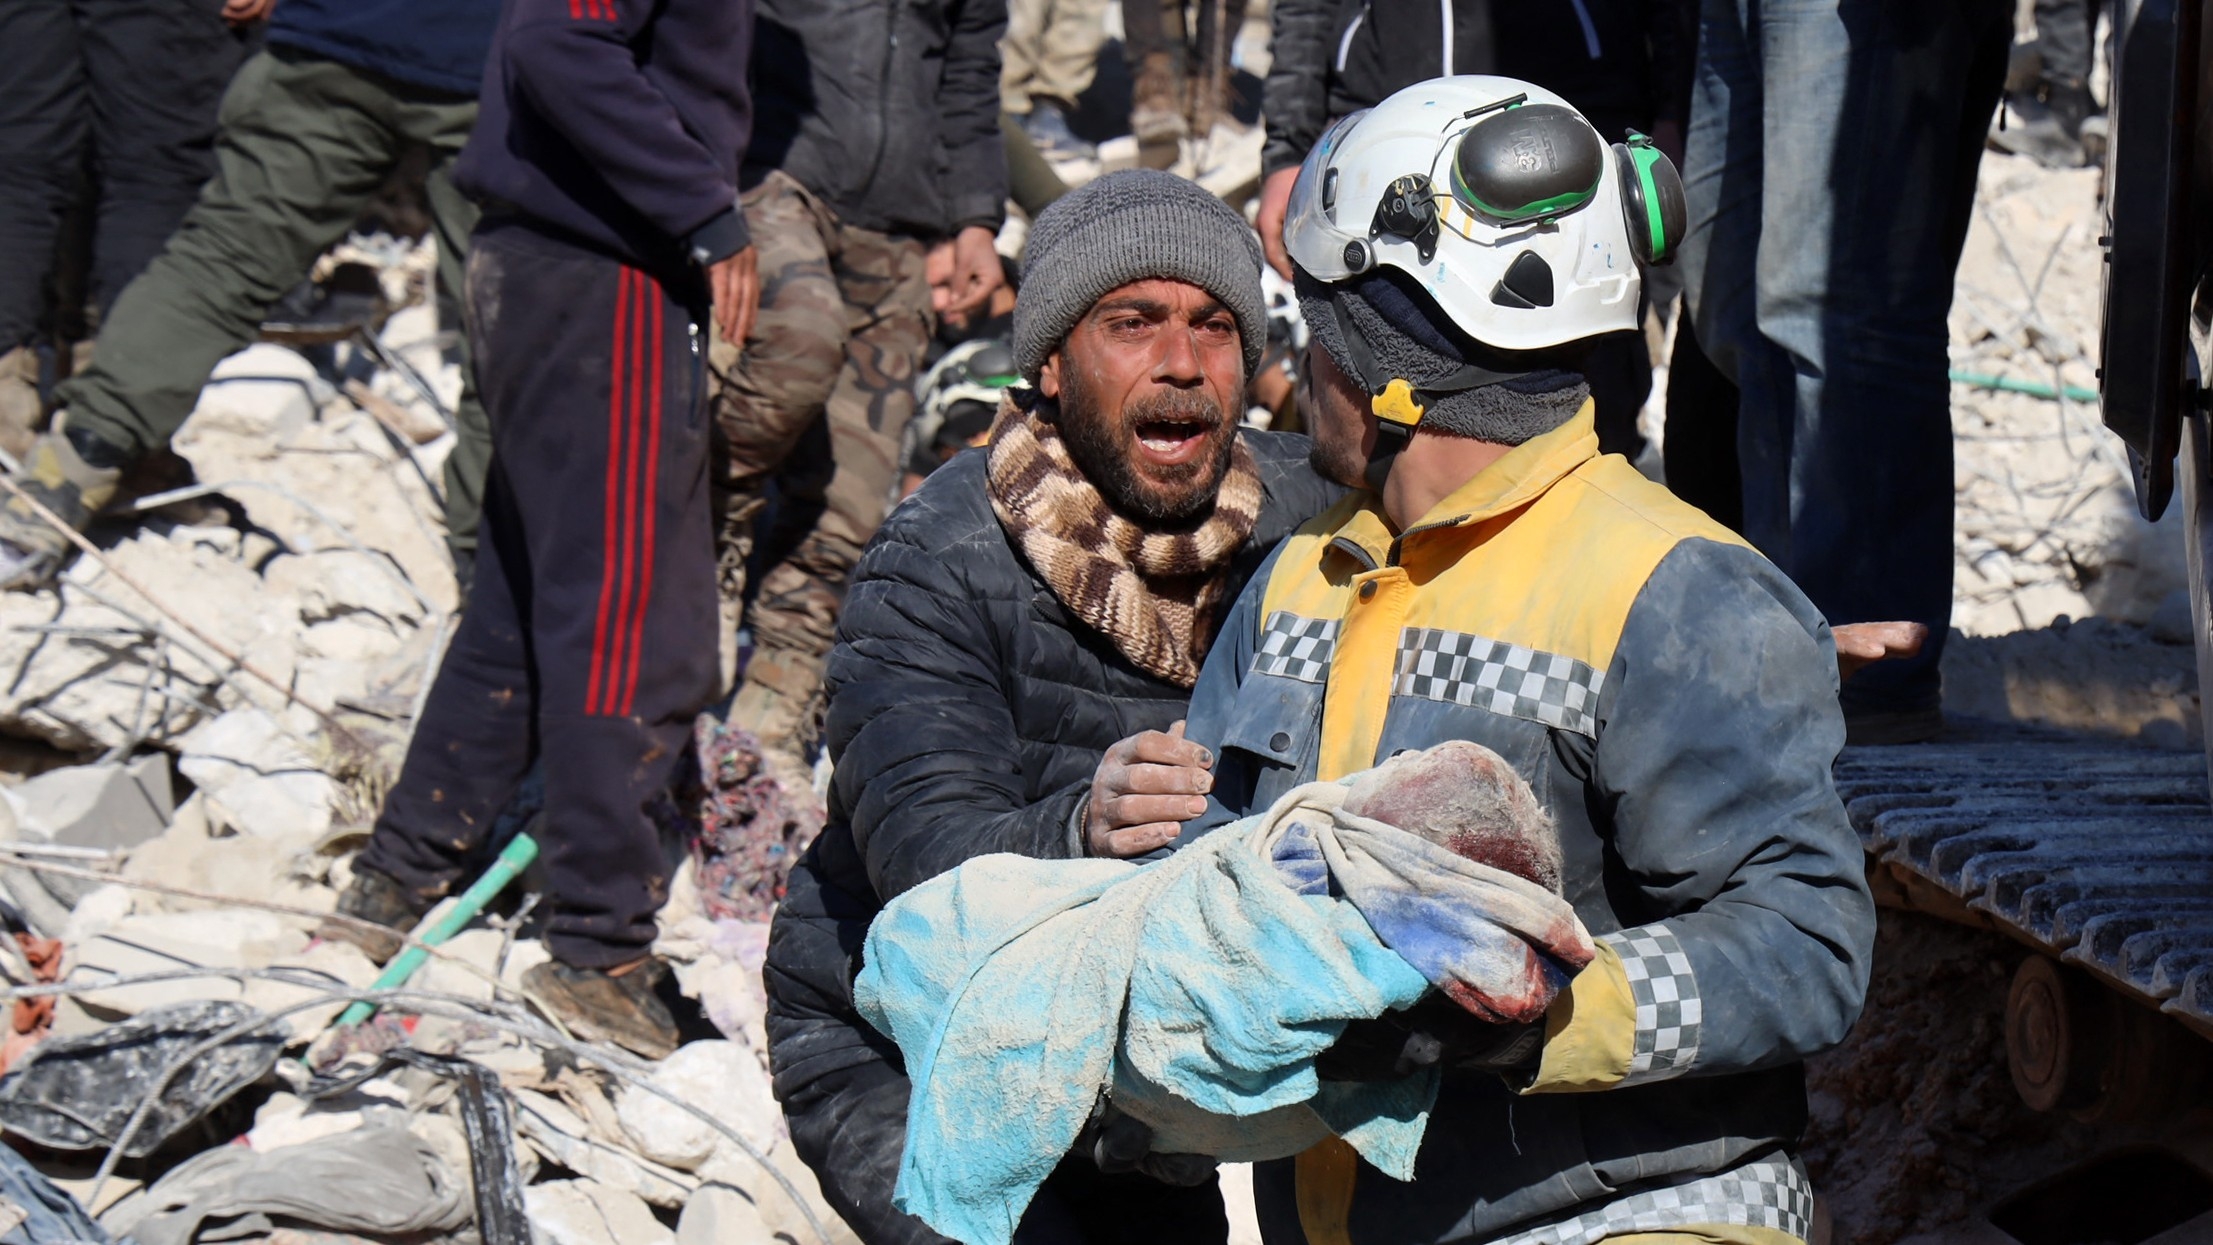 A man reacts as the body of his baby is pulled out from the rubble by a White Helmets rescue worker in Harim, in Syria's northwestern Idlib province, on 8 February 2023.